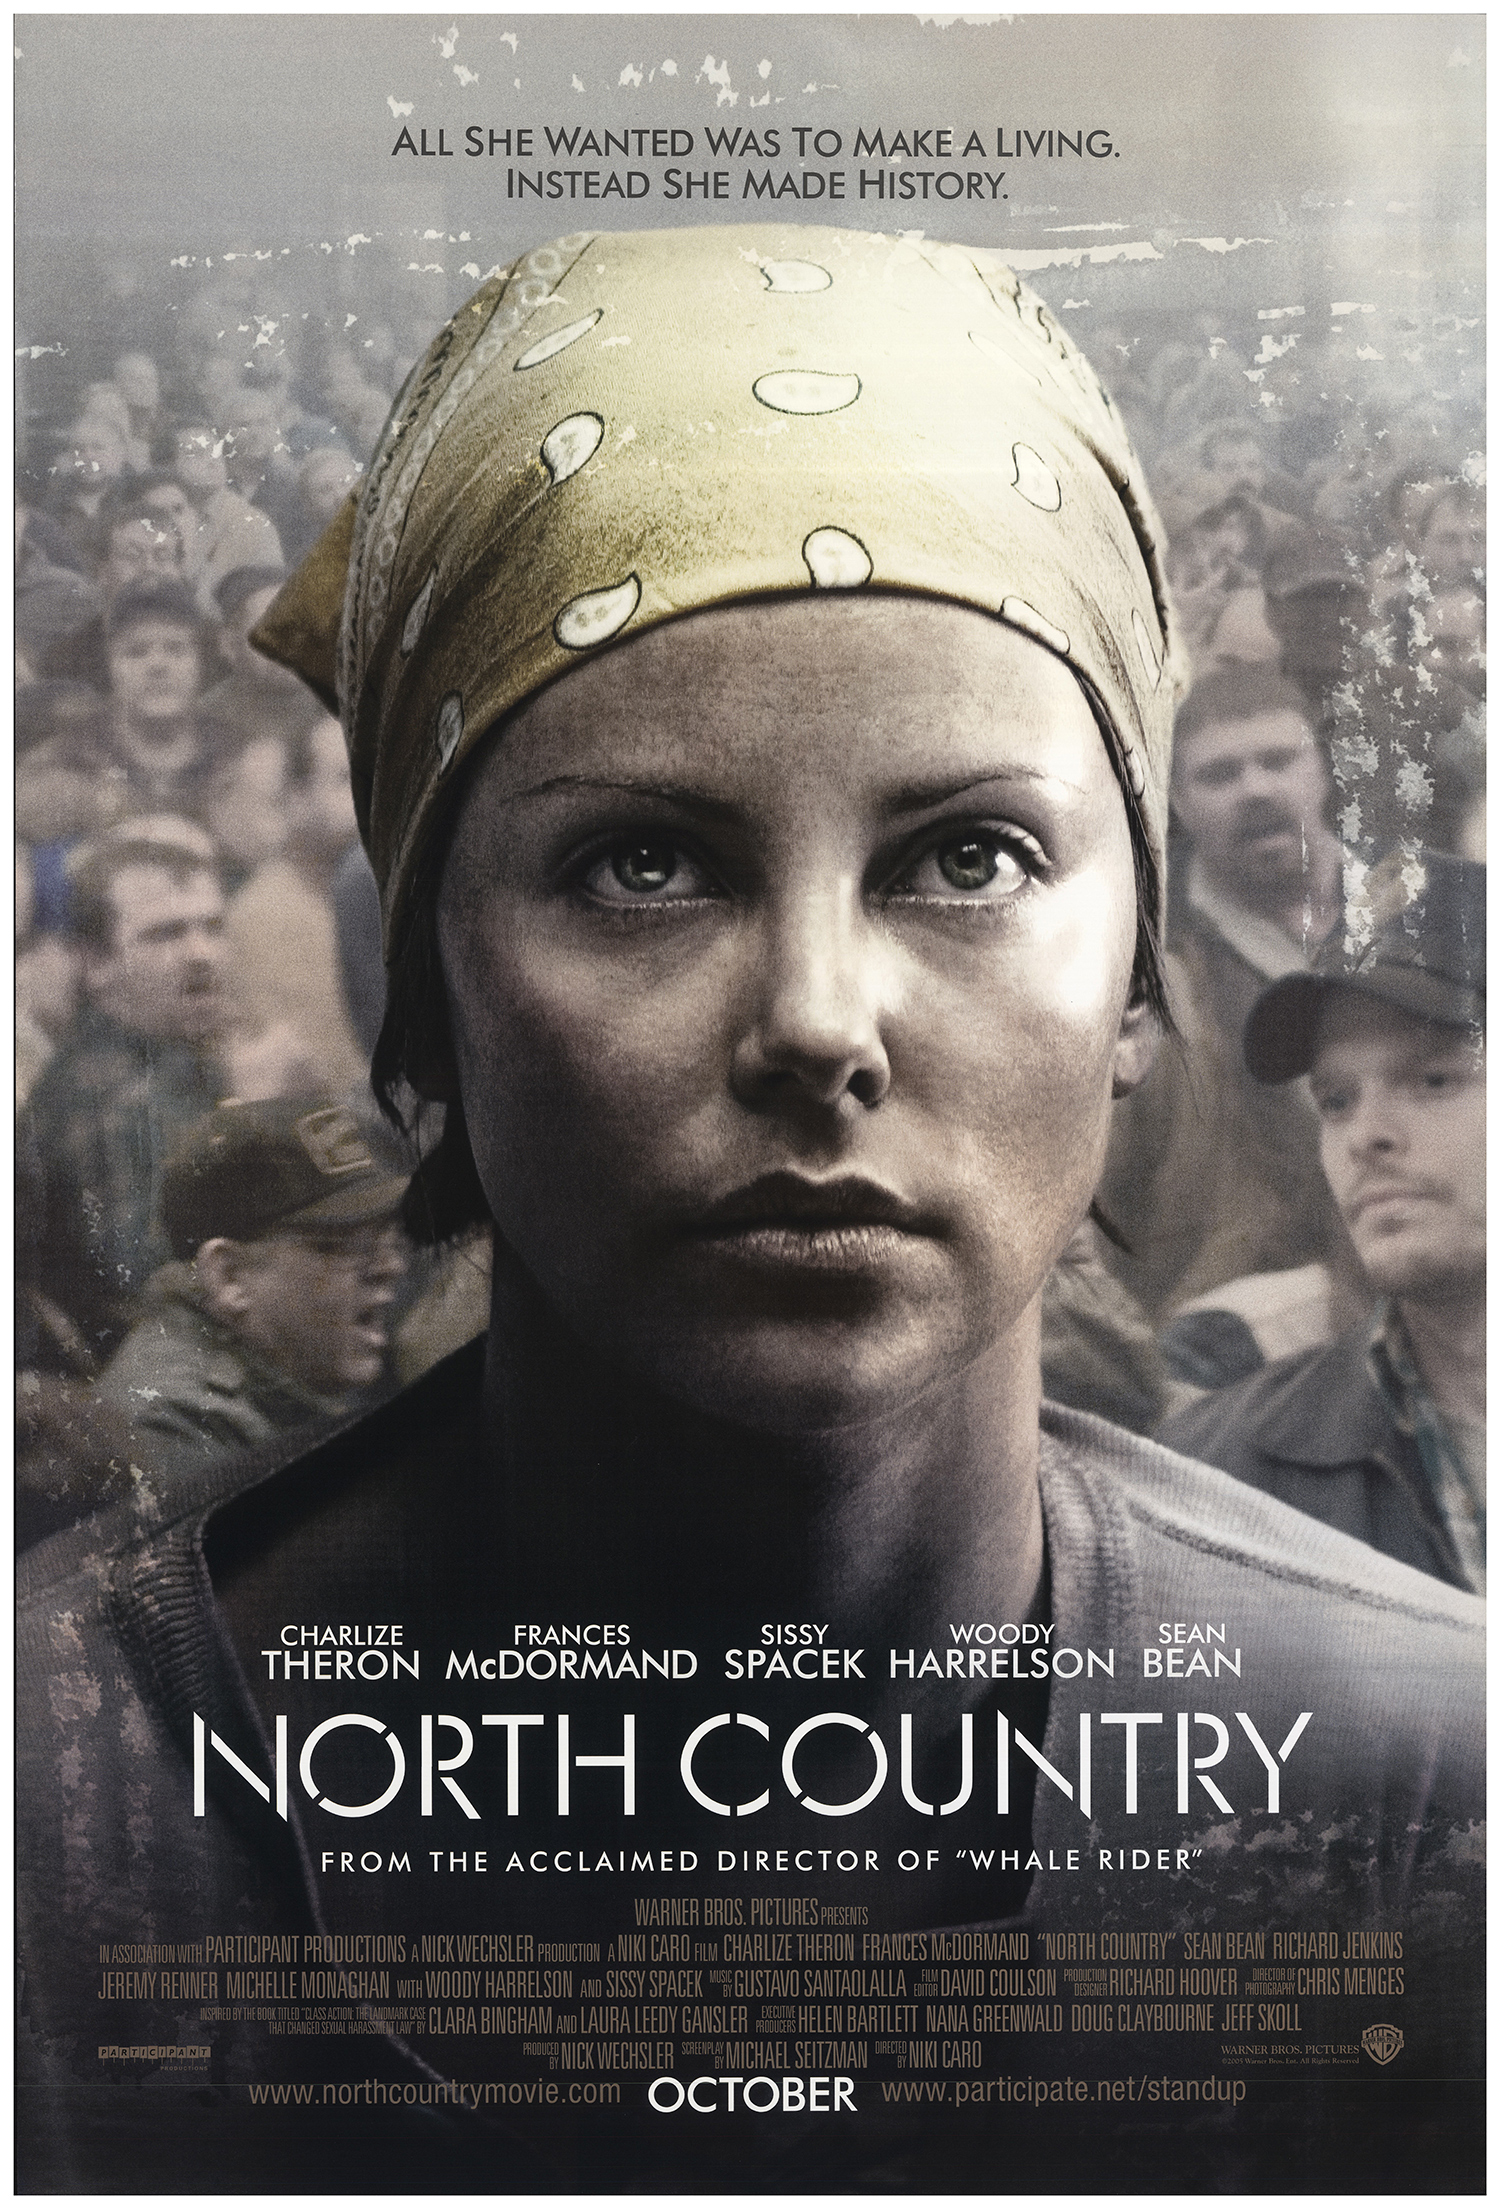 charlize theron with a yellow bandana and north country written in white letters at the bottom